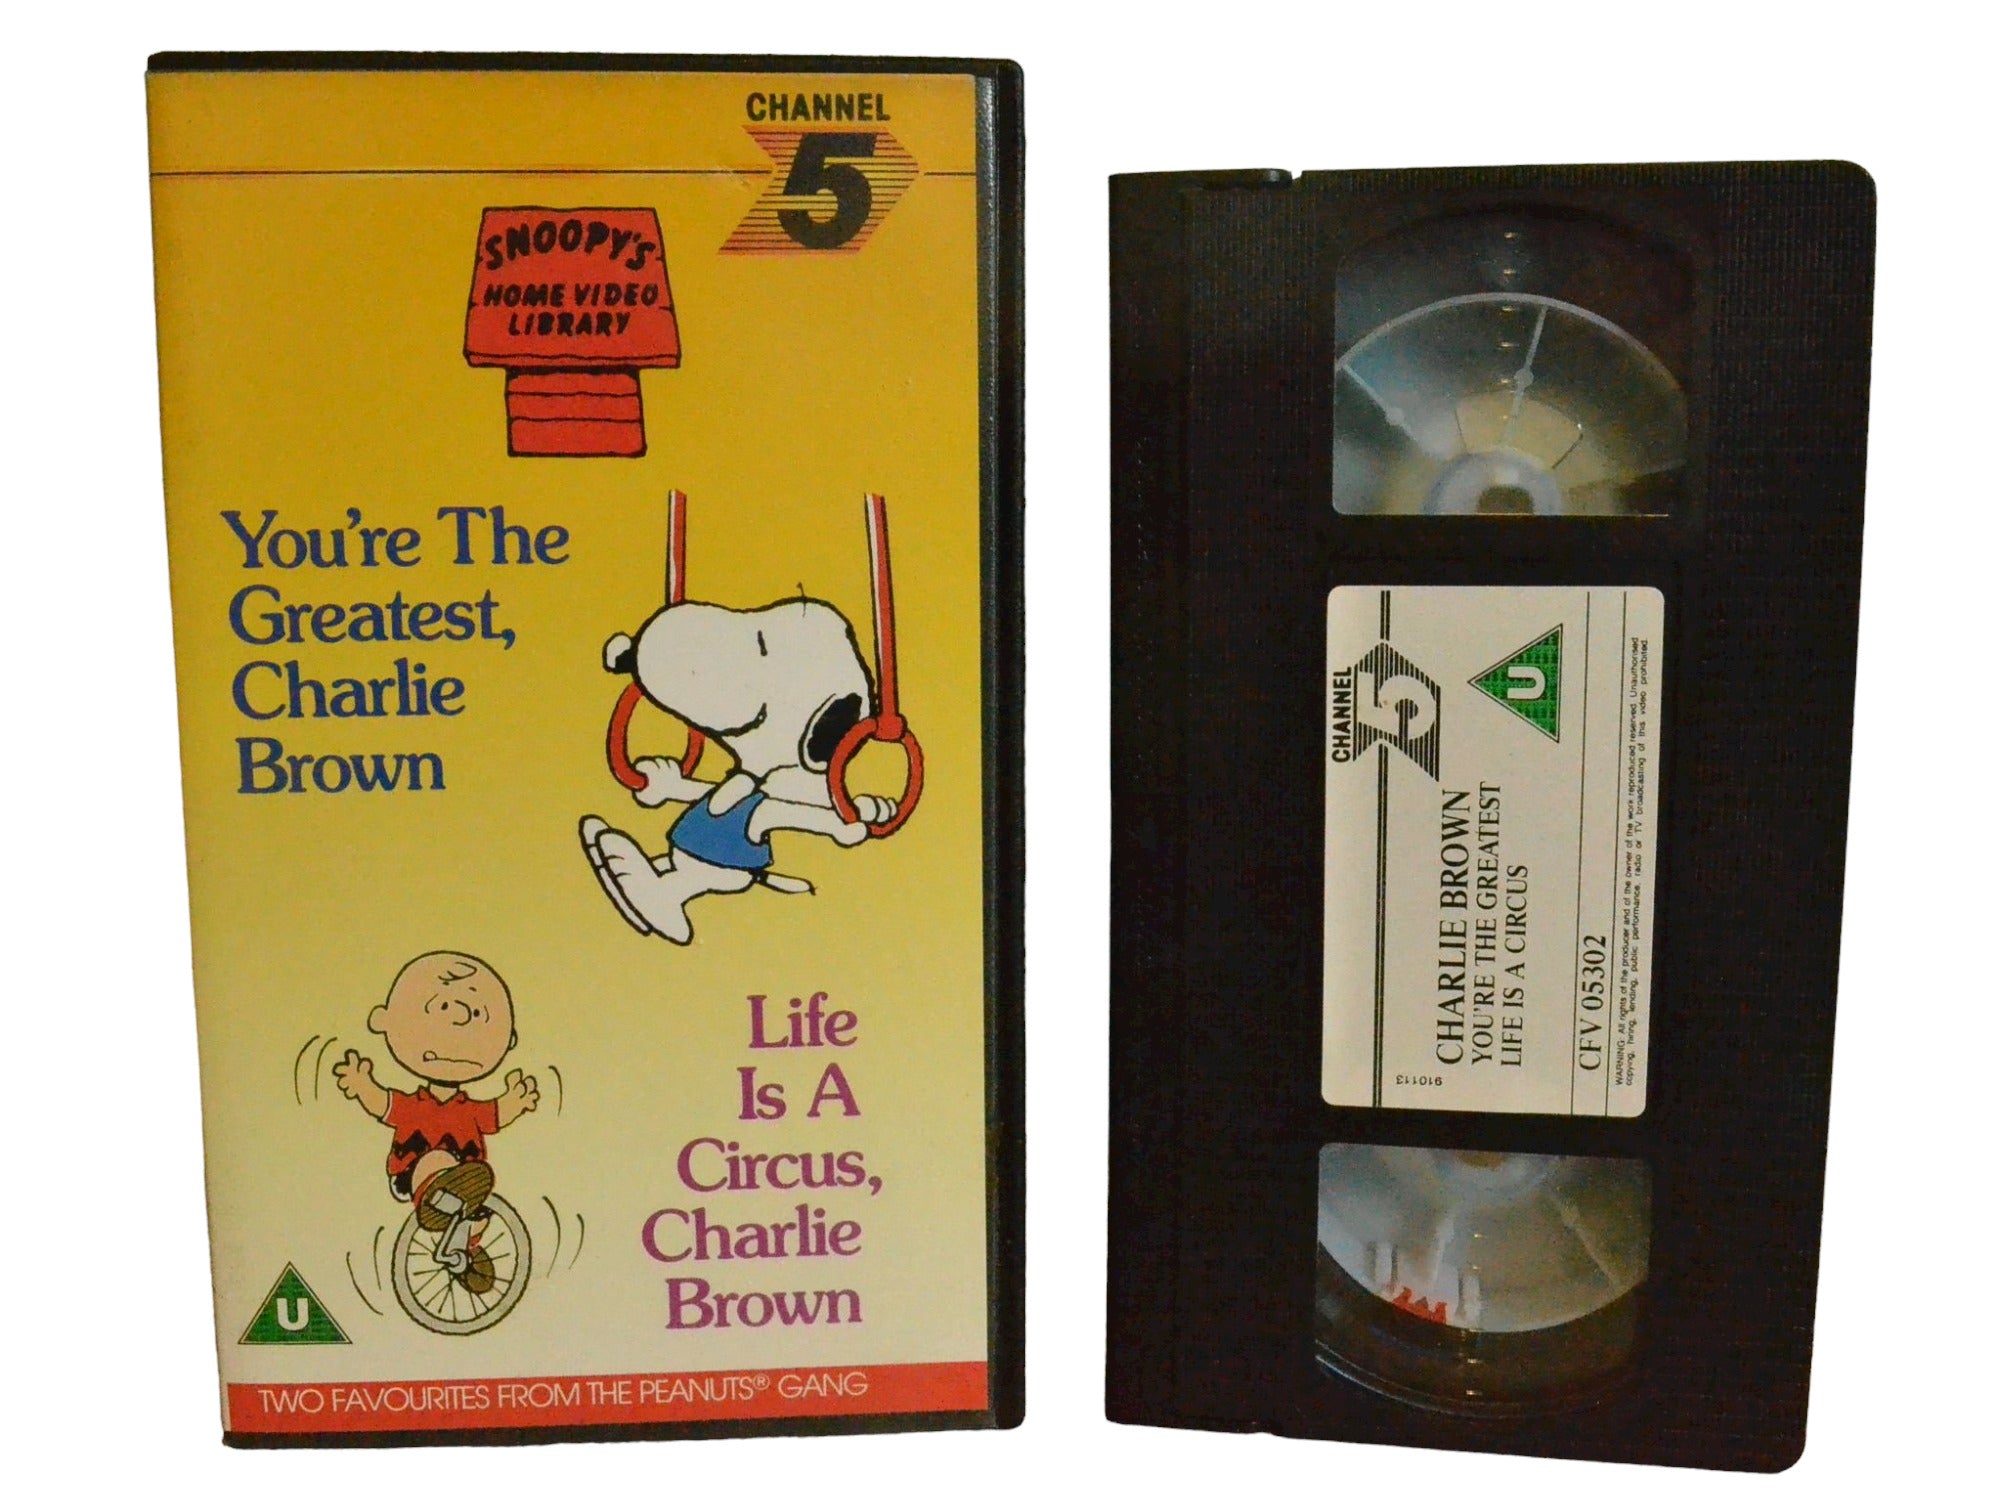 Channel　Brown　Class　–　Skelley　You're　Arrin　Charlie　the　5014226053028　VHS　Greatest　Golden　Childrens　PAL　Movies　LTD